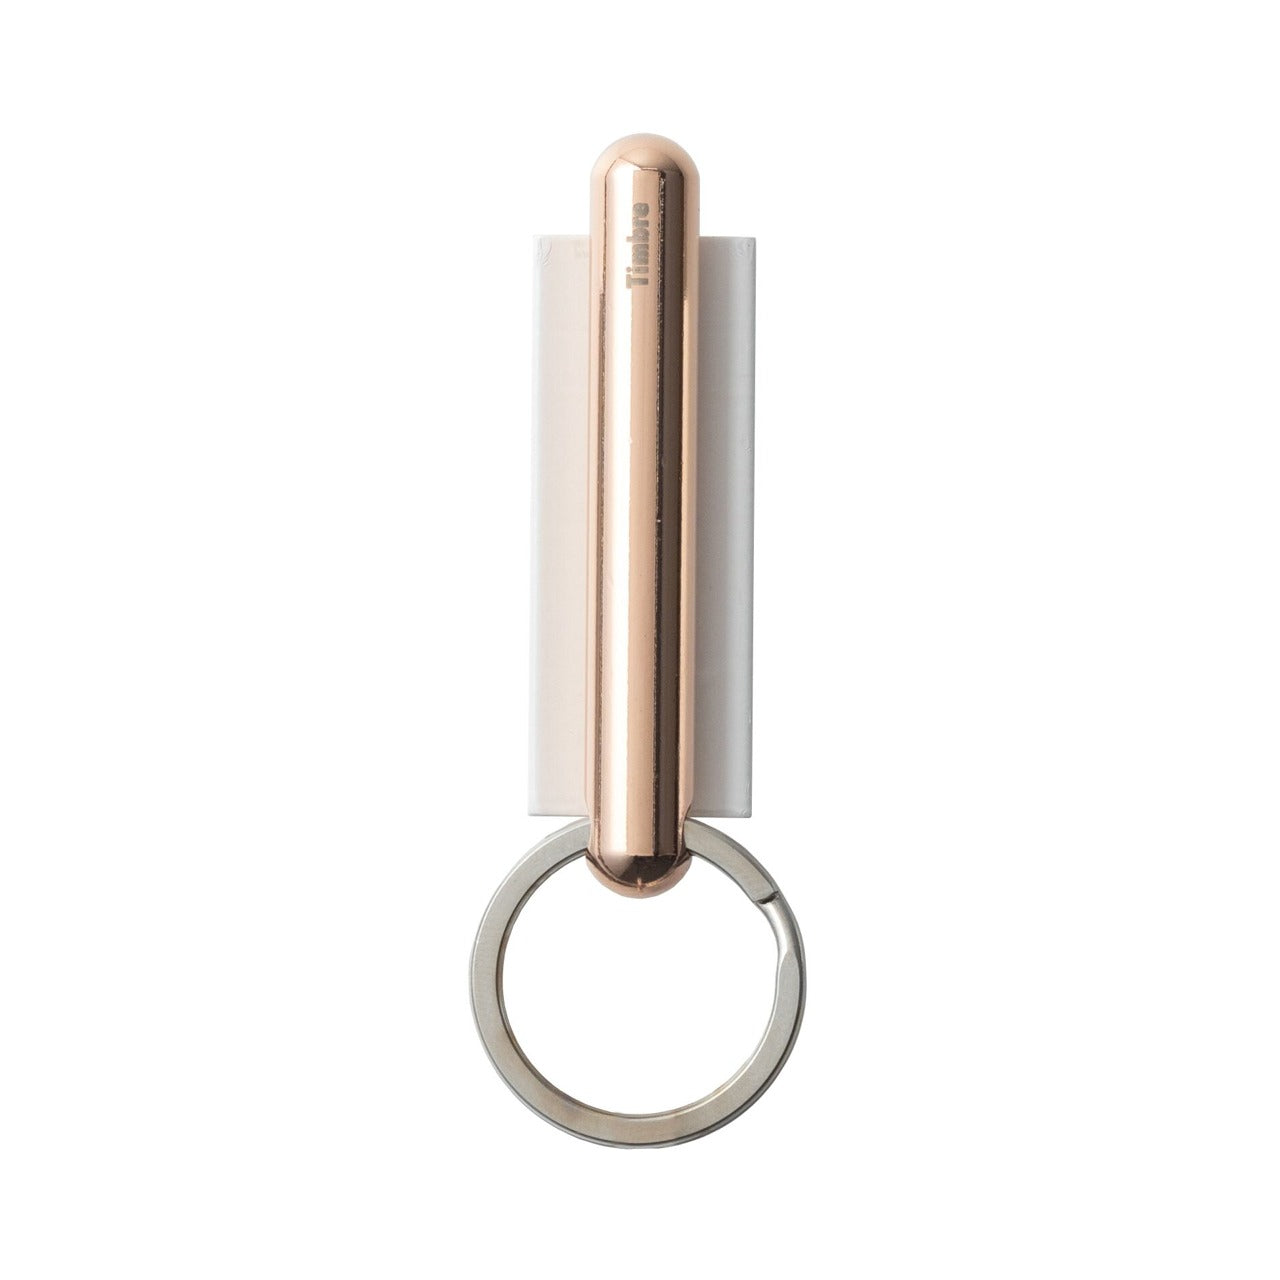 Timbre Magnetic Key Holder MARUBO Pink Gold